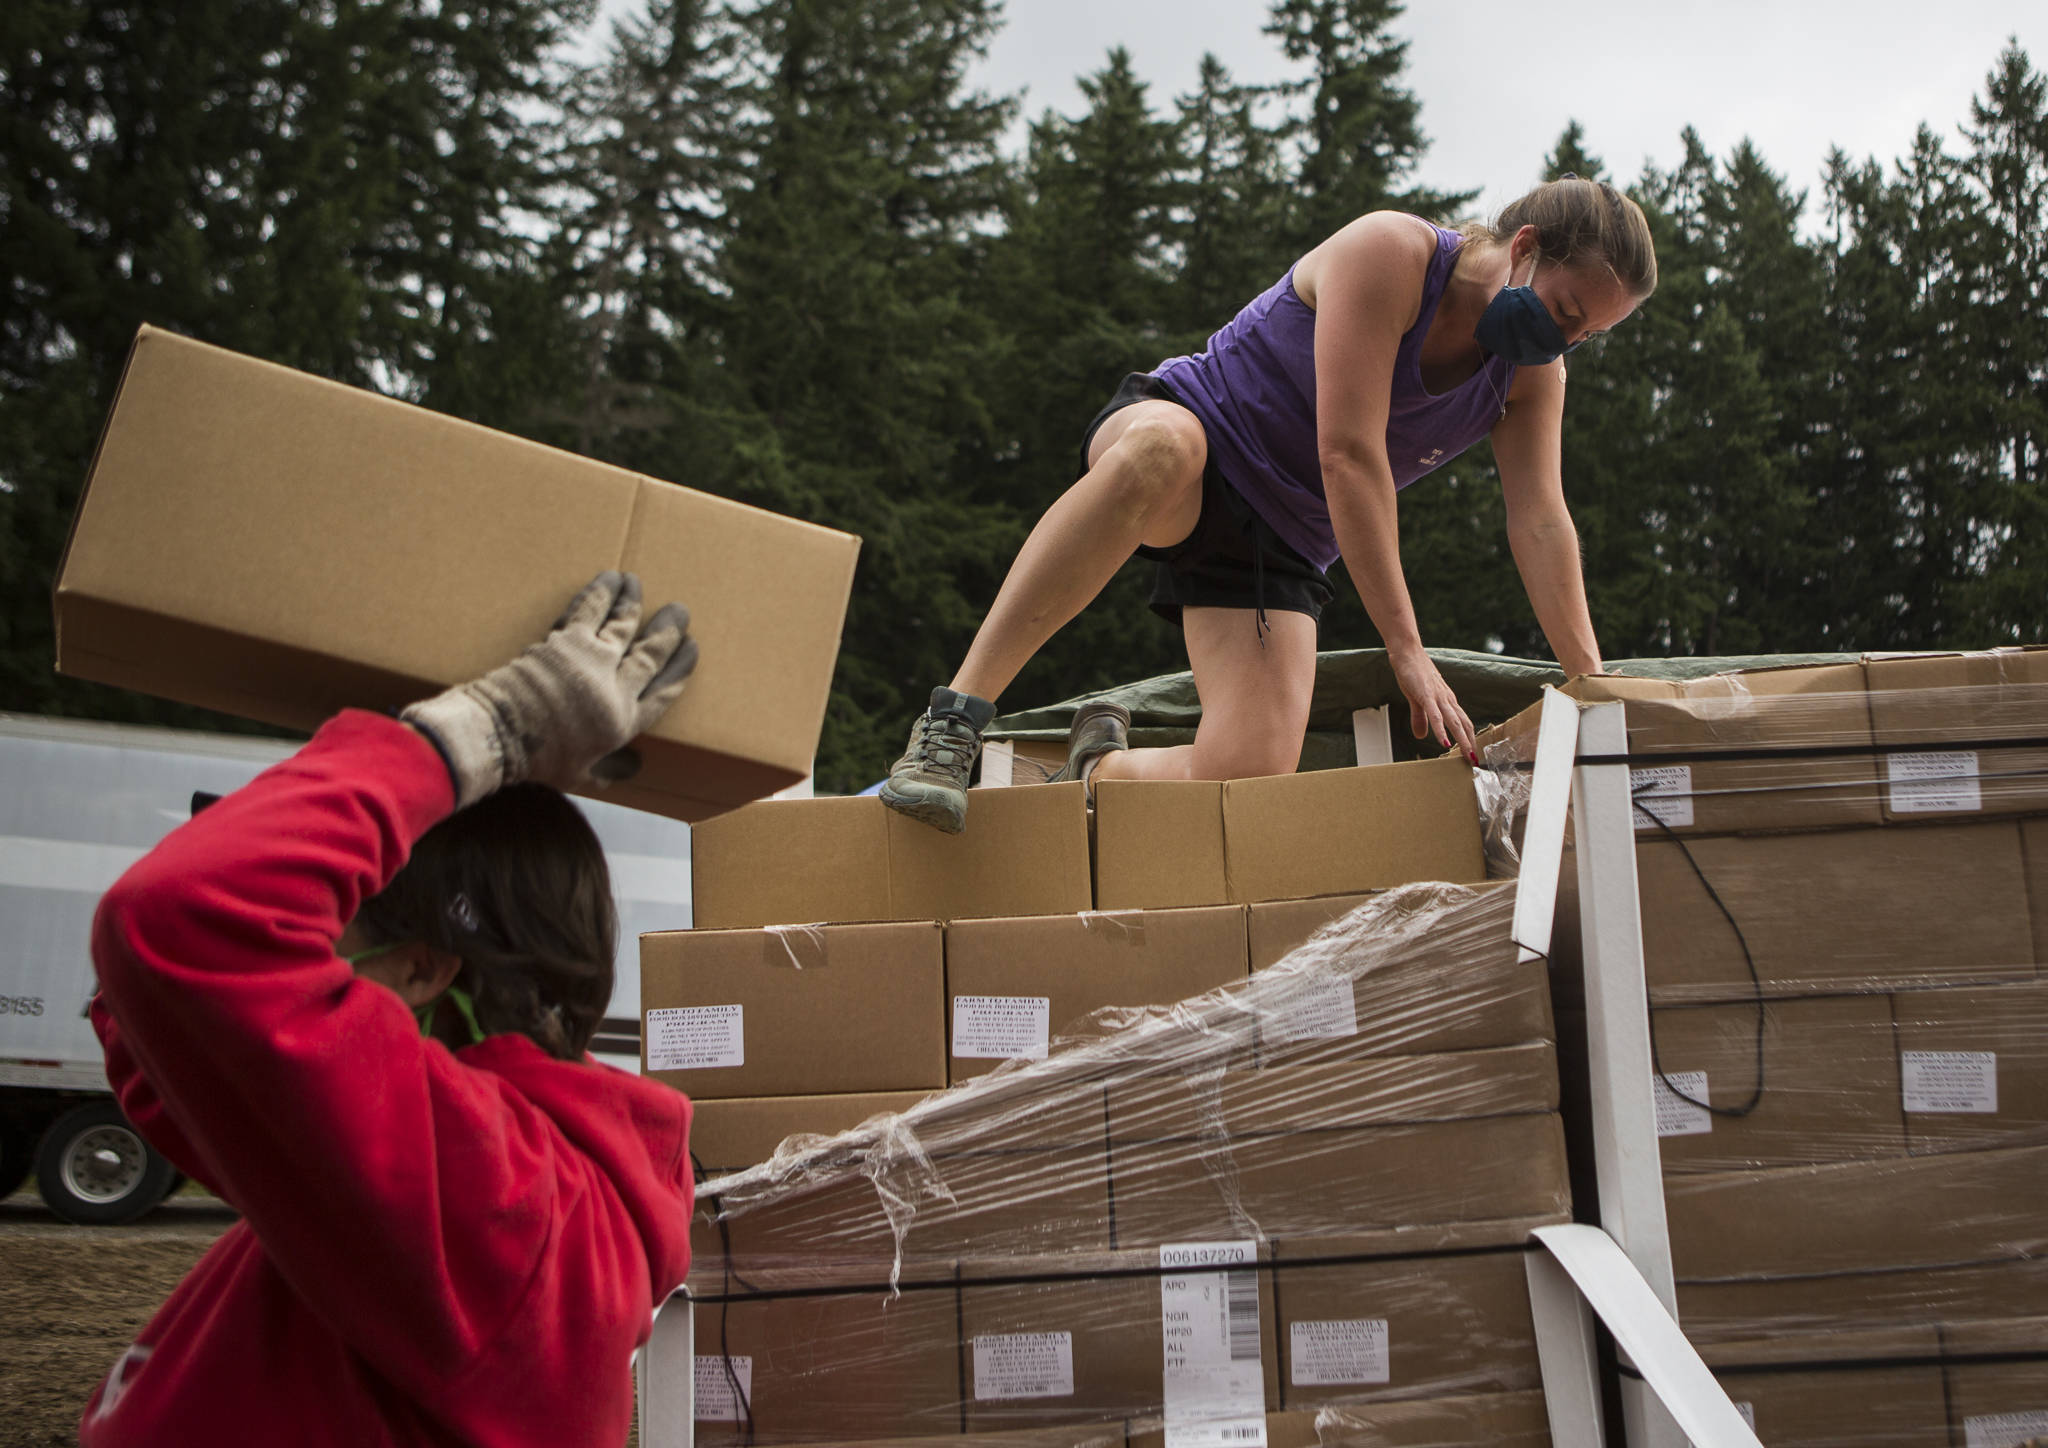 Alysha Herich (right) hands boxes of food to Vickie Cariello (left) to load into cars at Farmer Frog on July 24 in Woodinville. (Olivia Vanni / The Herald)